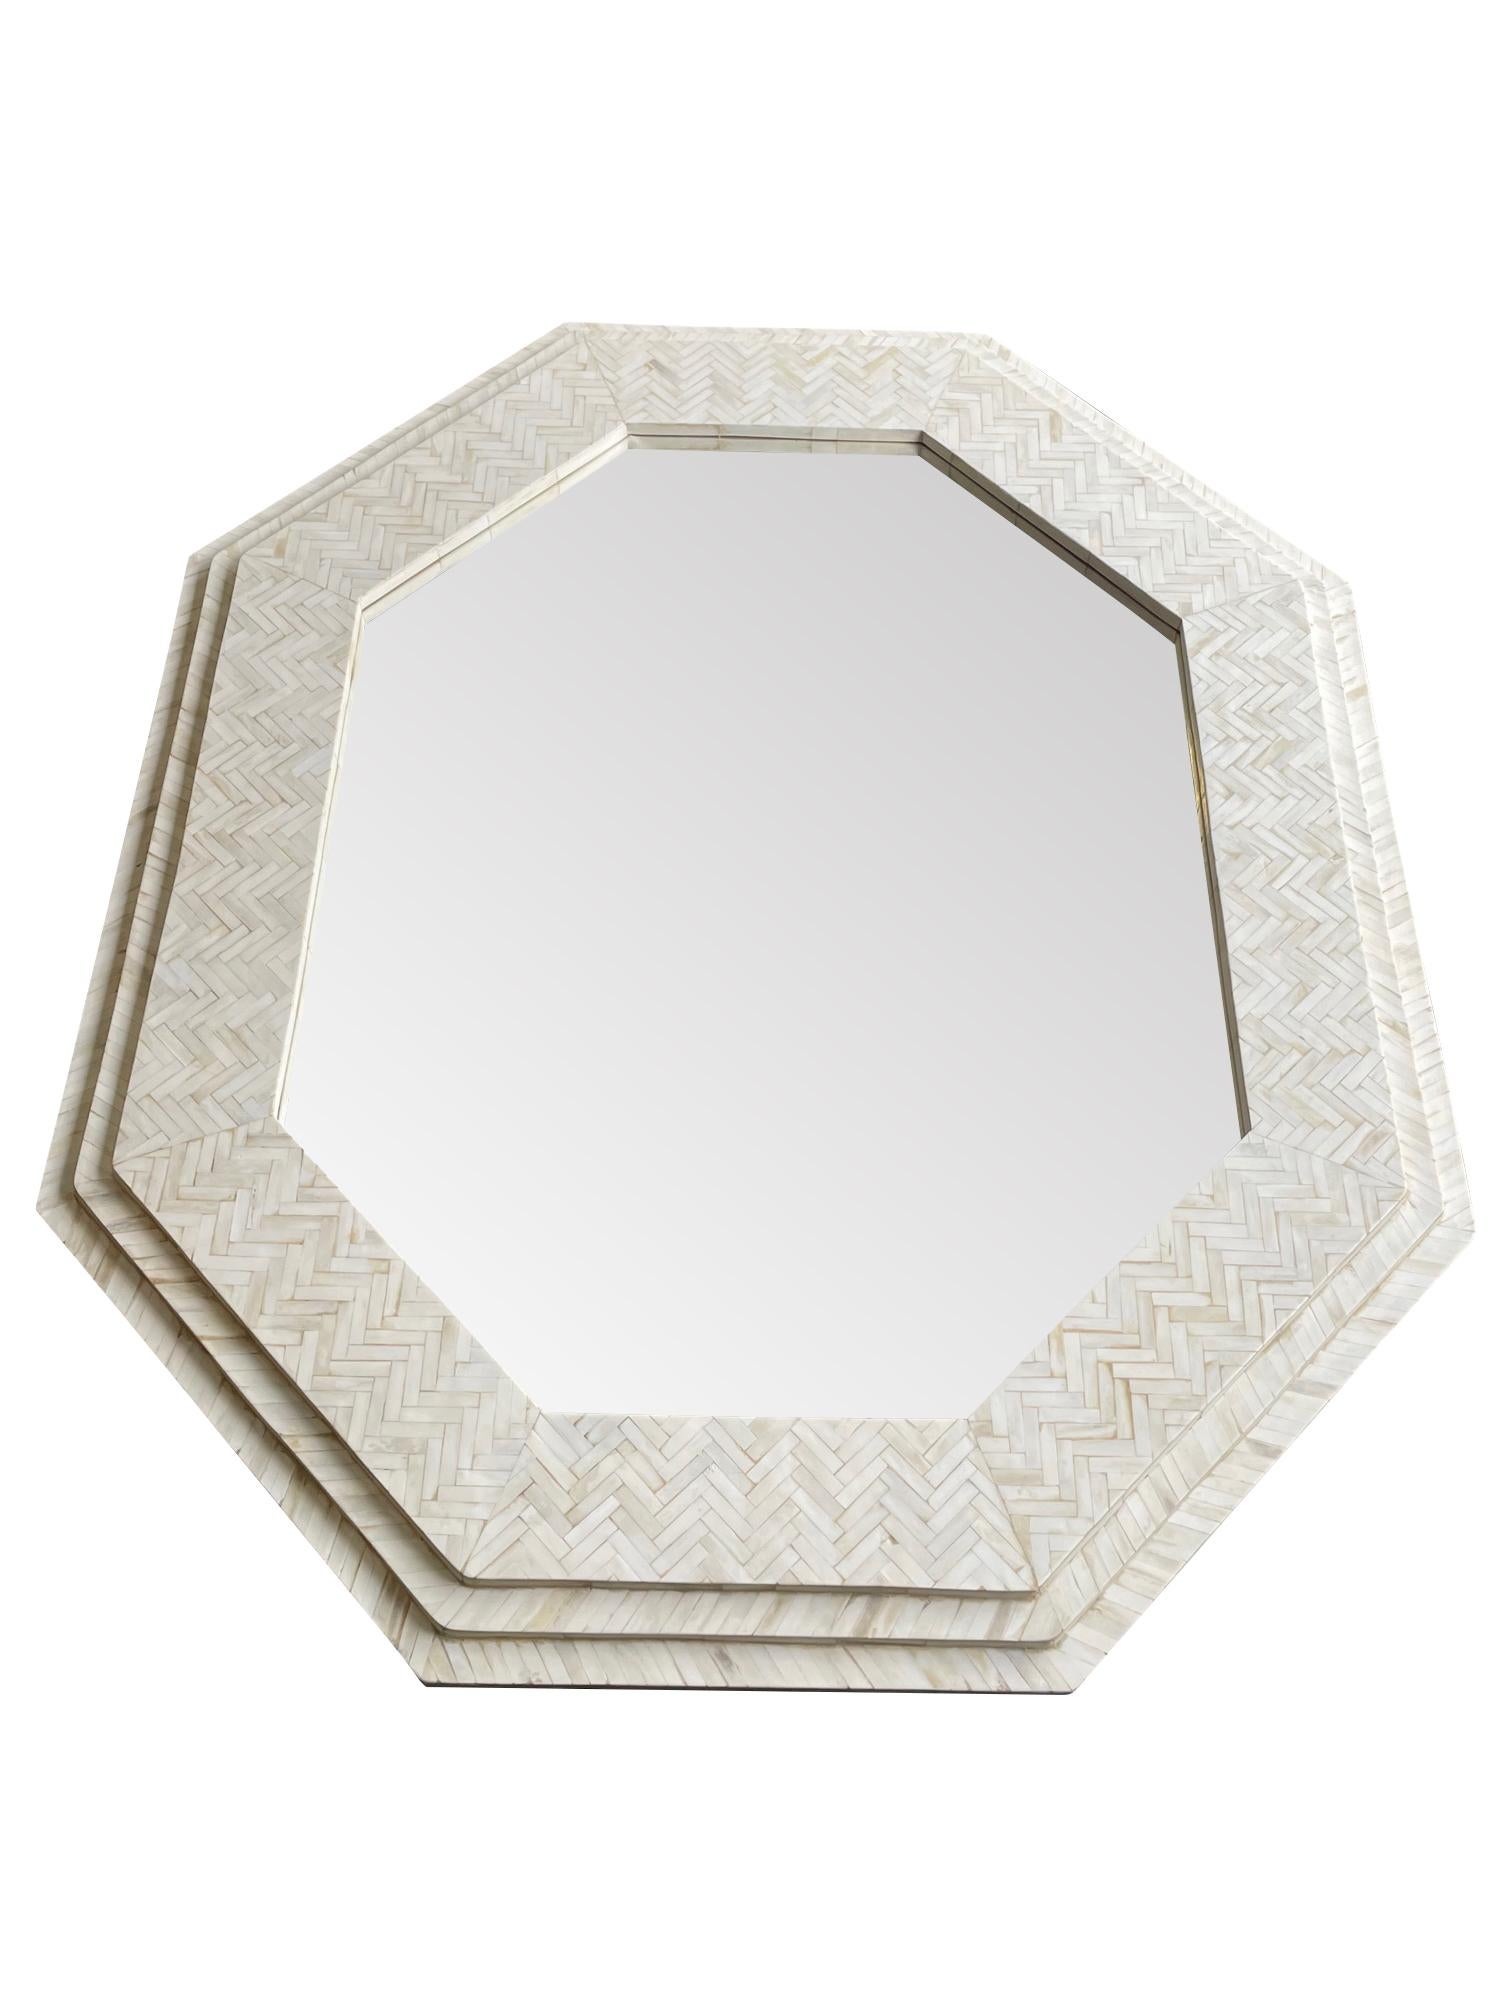 A large handmade inlaid bone octagonal mirror in the style of Enrique Garcel.